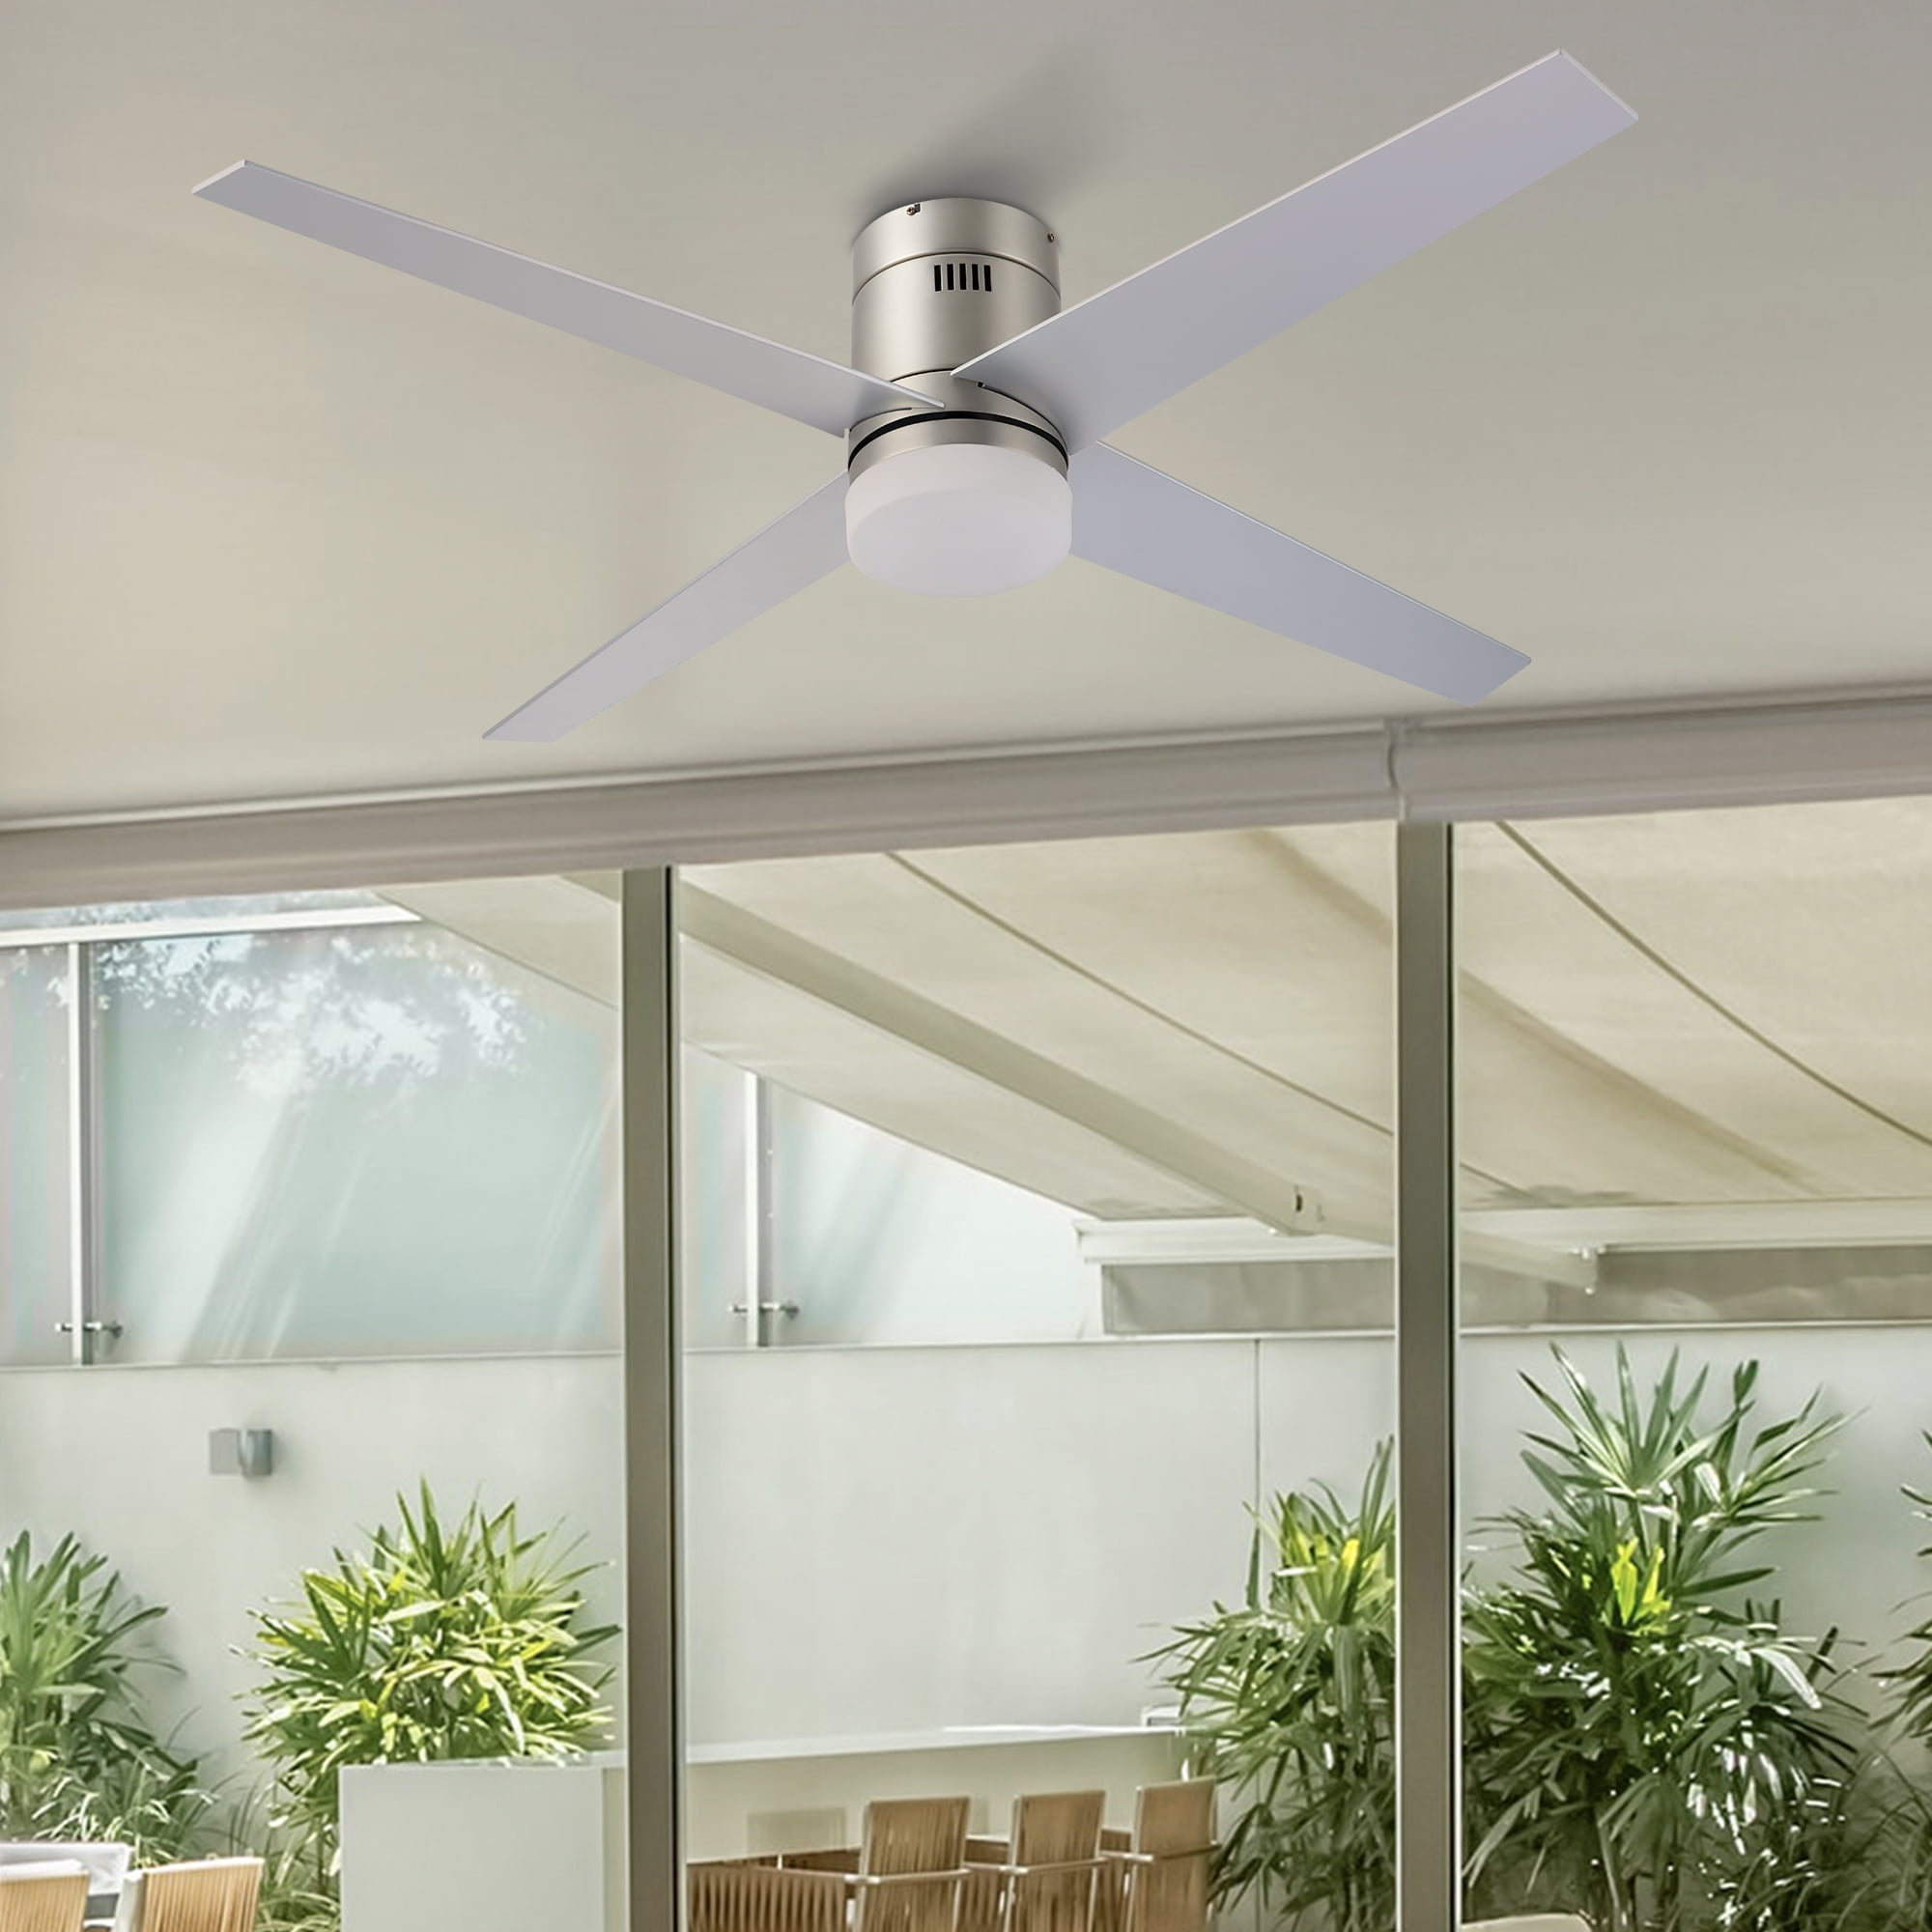 Details about   52 In LED Indoor Low Profile Ceiling Fan With Light Brushed NickelBronze 